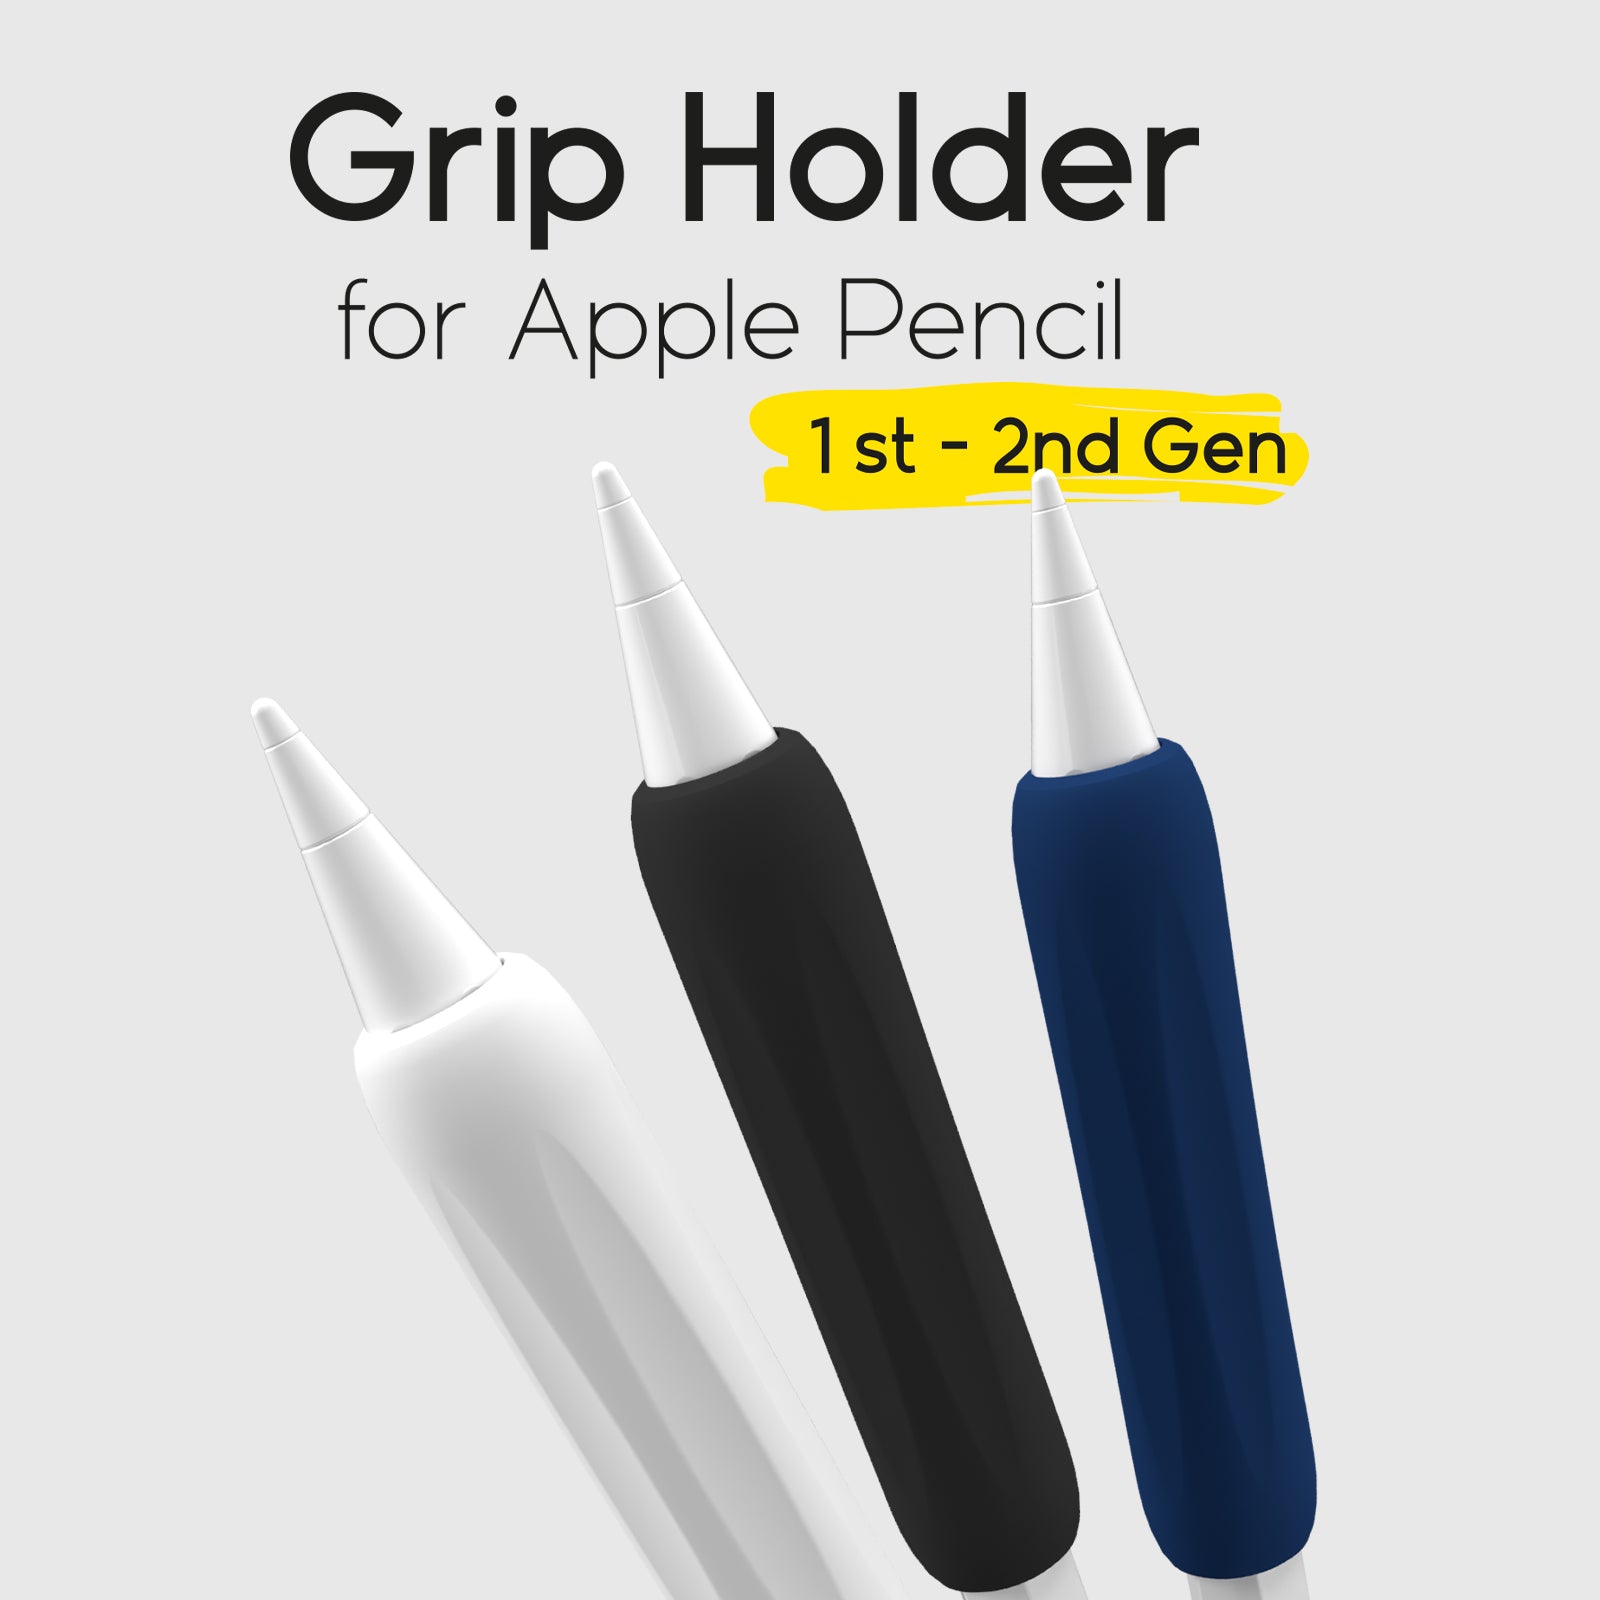 Grip holder for Apple Pencil Pro/ 1st and 2nd generation Apple Pencils